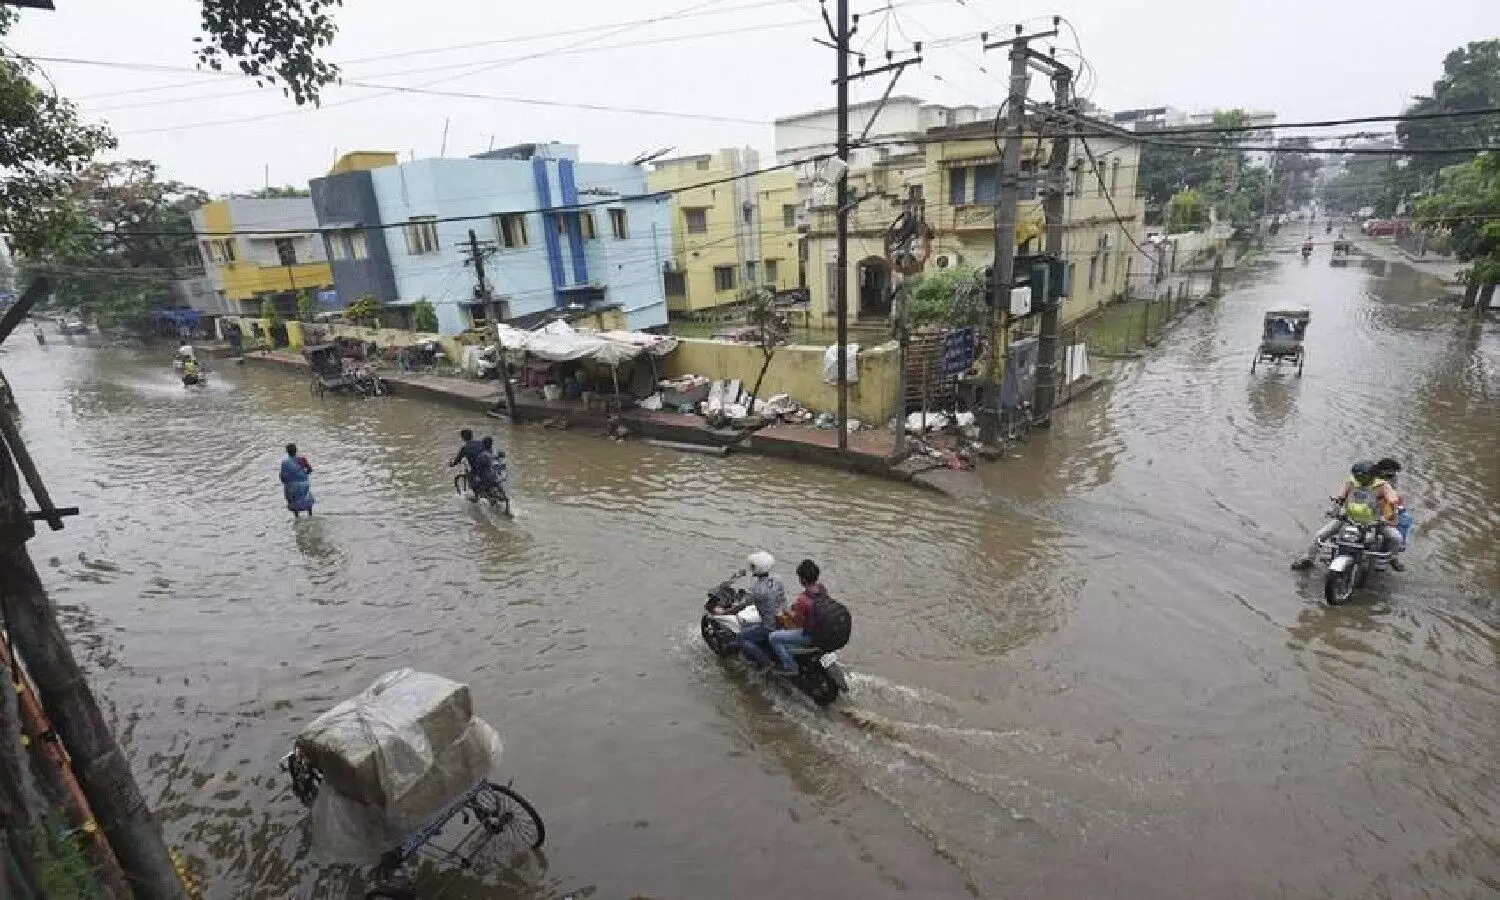 Many districts of Bihar seem to be heading towards the danger of deluge